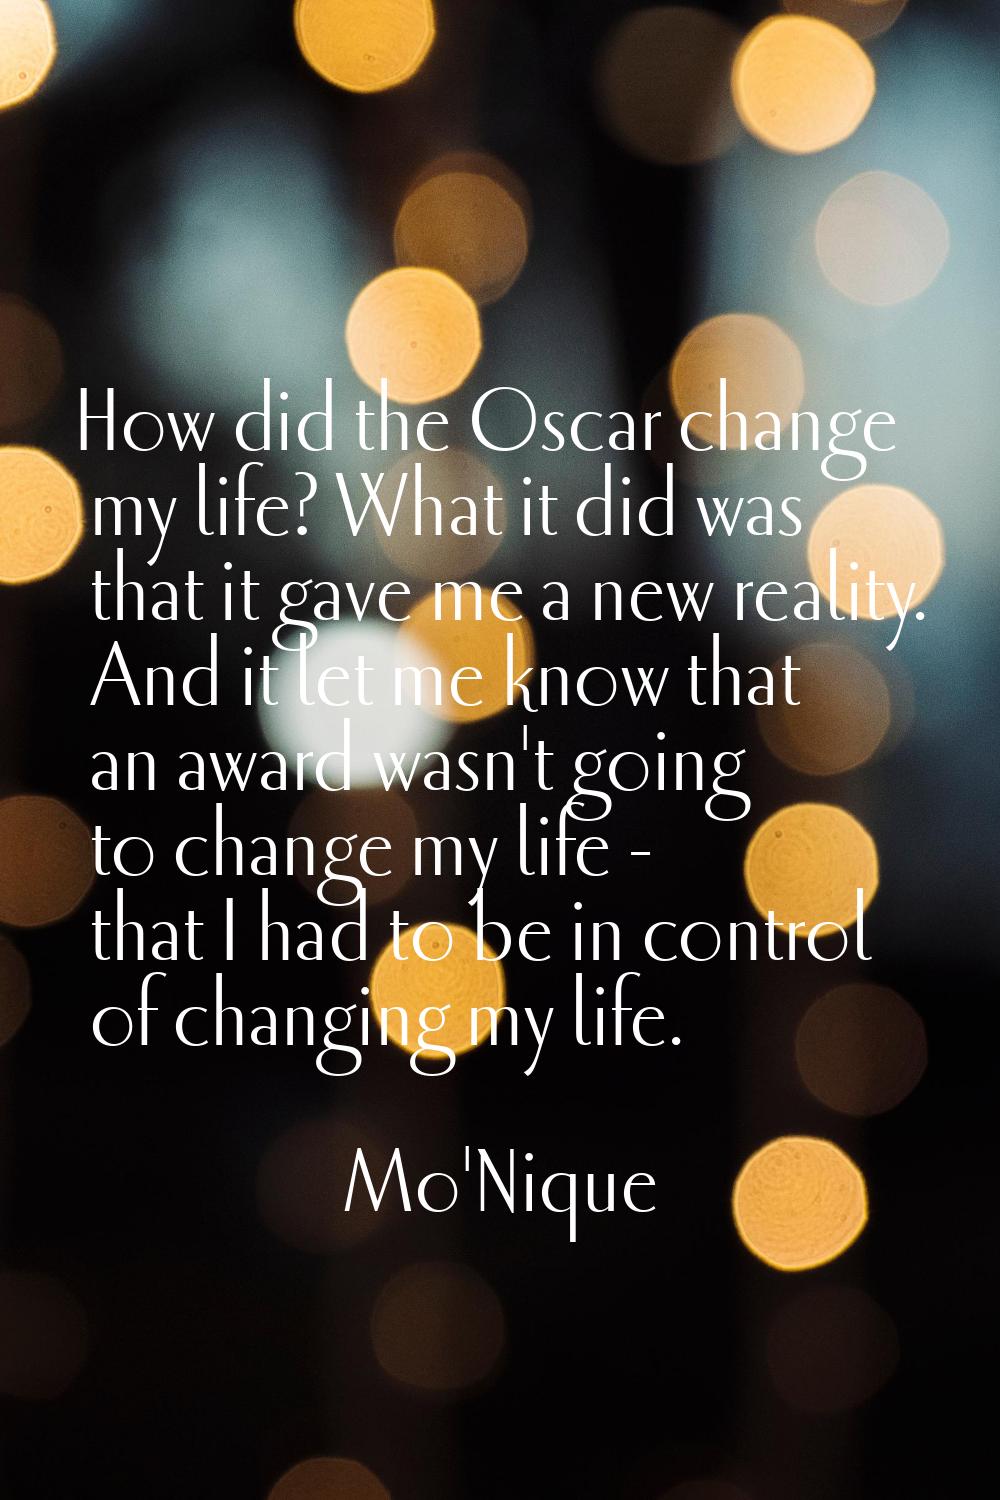 How did the Oscar change my life? What it did was that it gave me a new reality. And it let me know